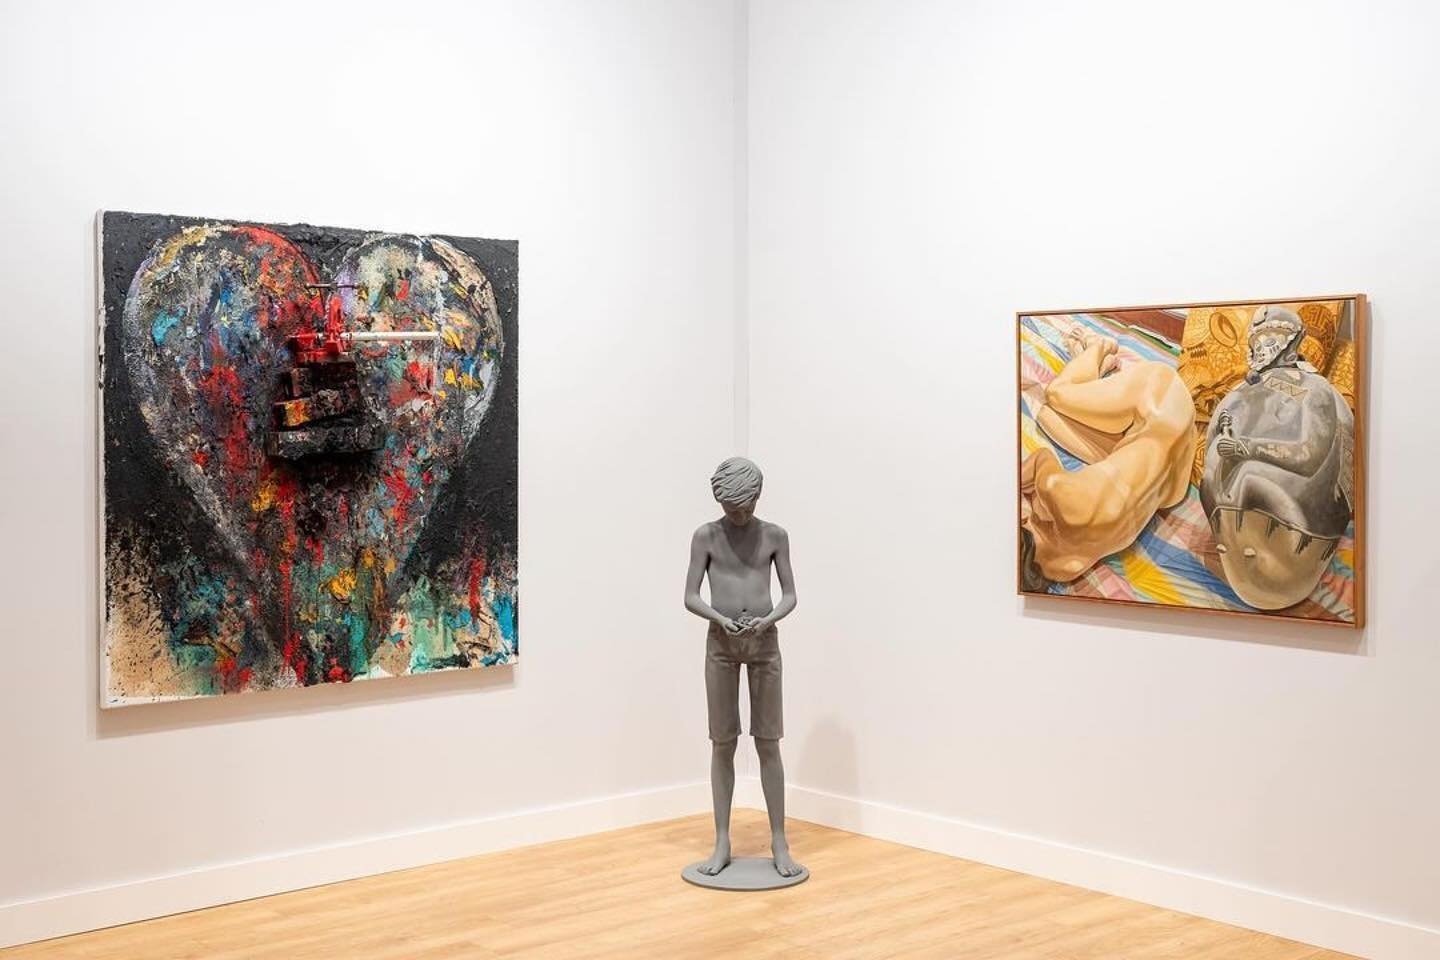 Are you going to TEFAF New York this weekend? Be sure to see Jim&rsquo;s work in TEMPLON&rsquo;s booth 326.

@galerietemplon presents works by Norbert Bisky, Will Cotton, Jim Dine, Malcolm Morley, Hans Op de Beeck, Philip Pearlstein, Chiharu Shiota a